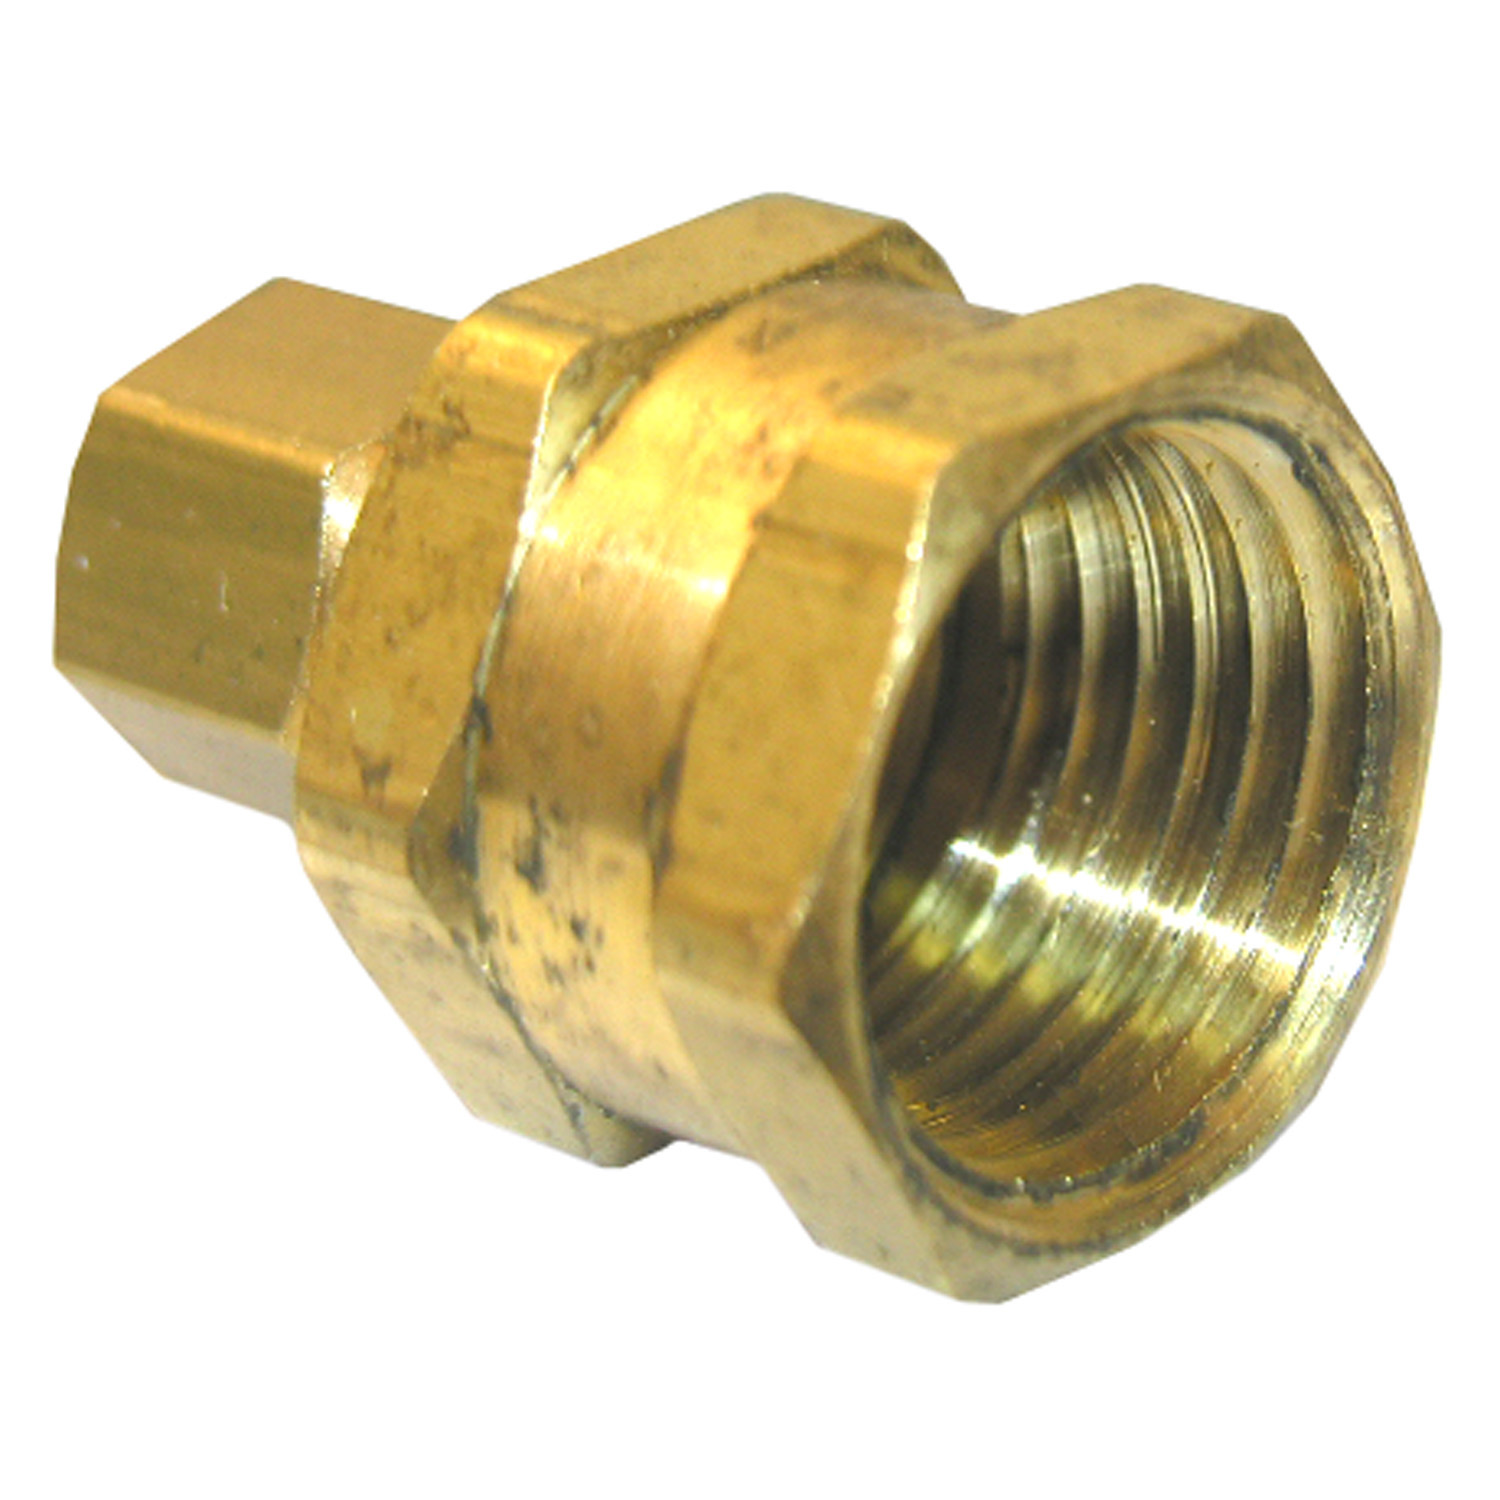 17-6625 Pipe Adapter, 5/16 x 3/8 in, Compression x FPT, Brass, 150 psi Pressure